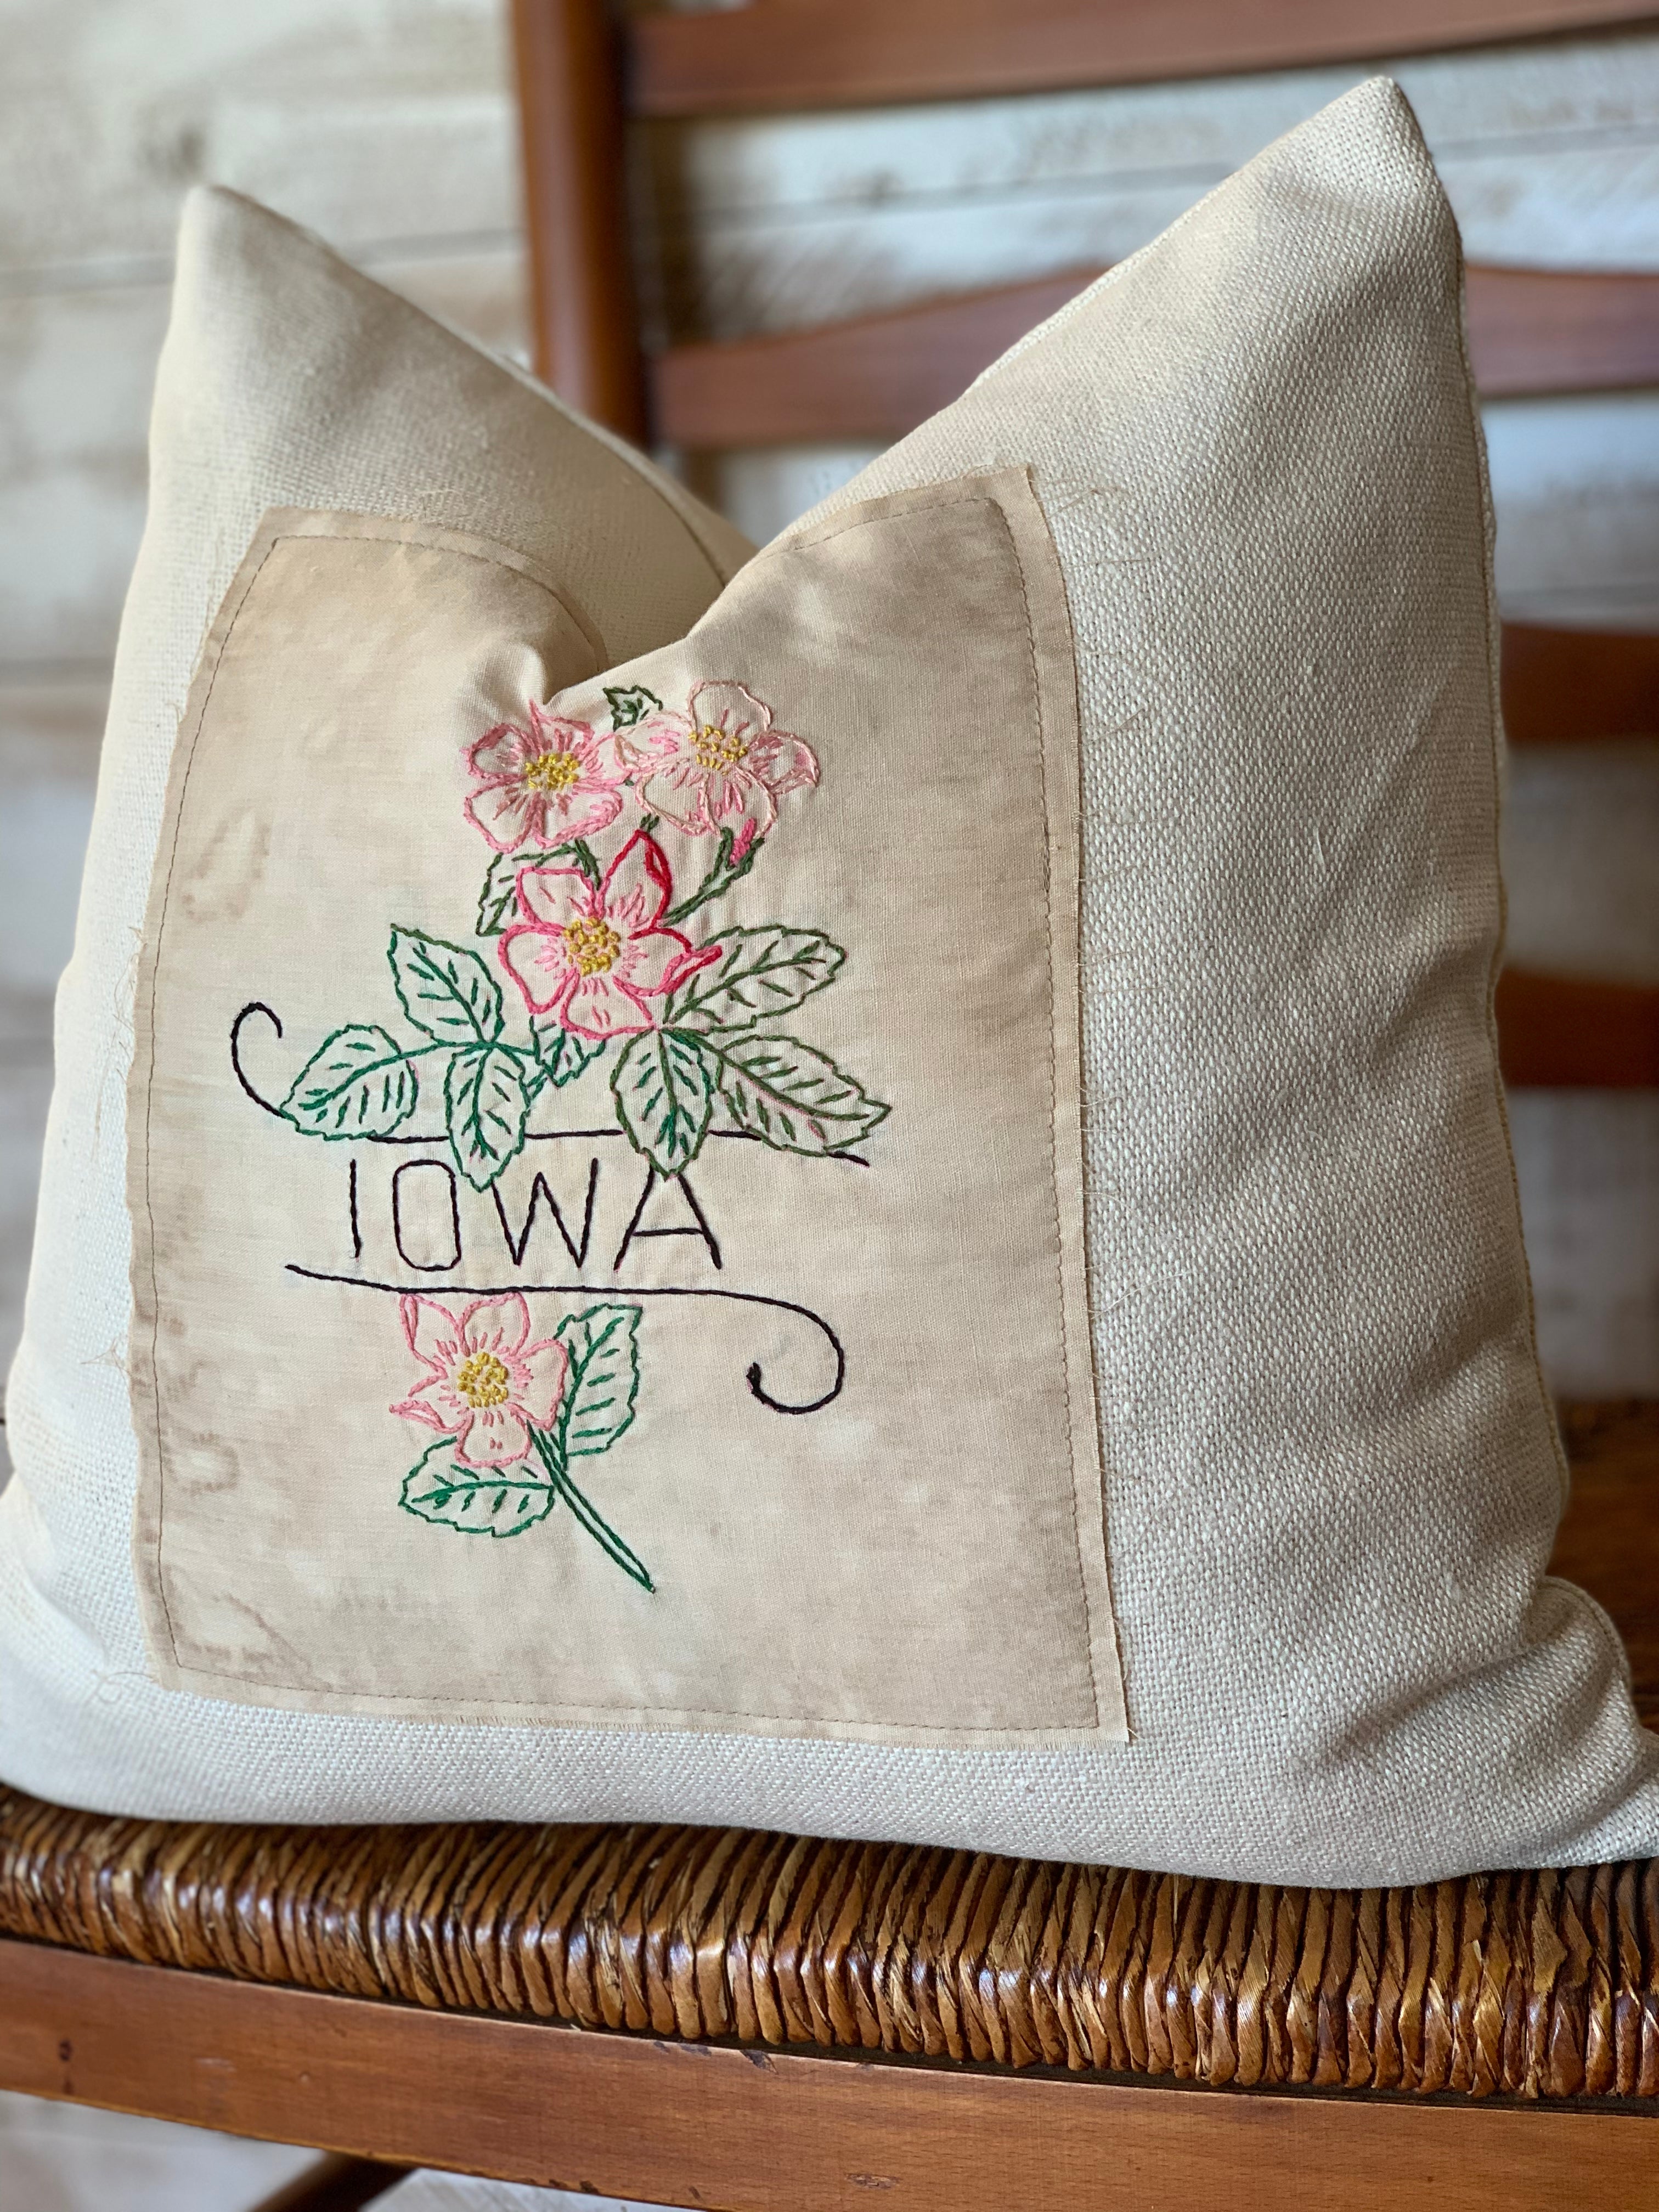 Iowa State Pillow - Embroidered